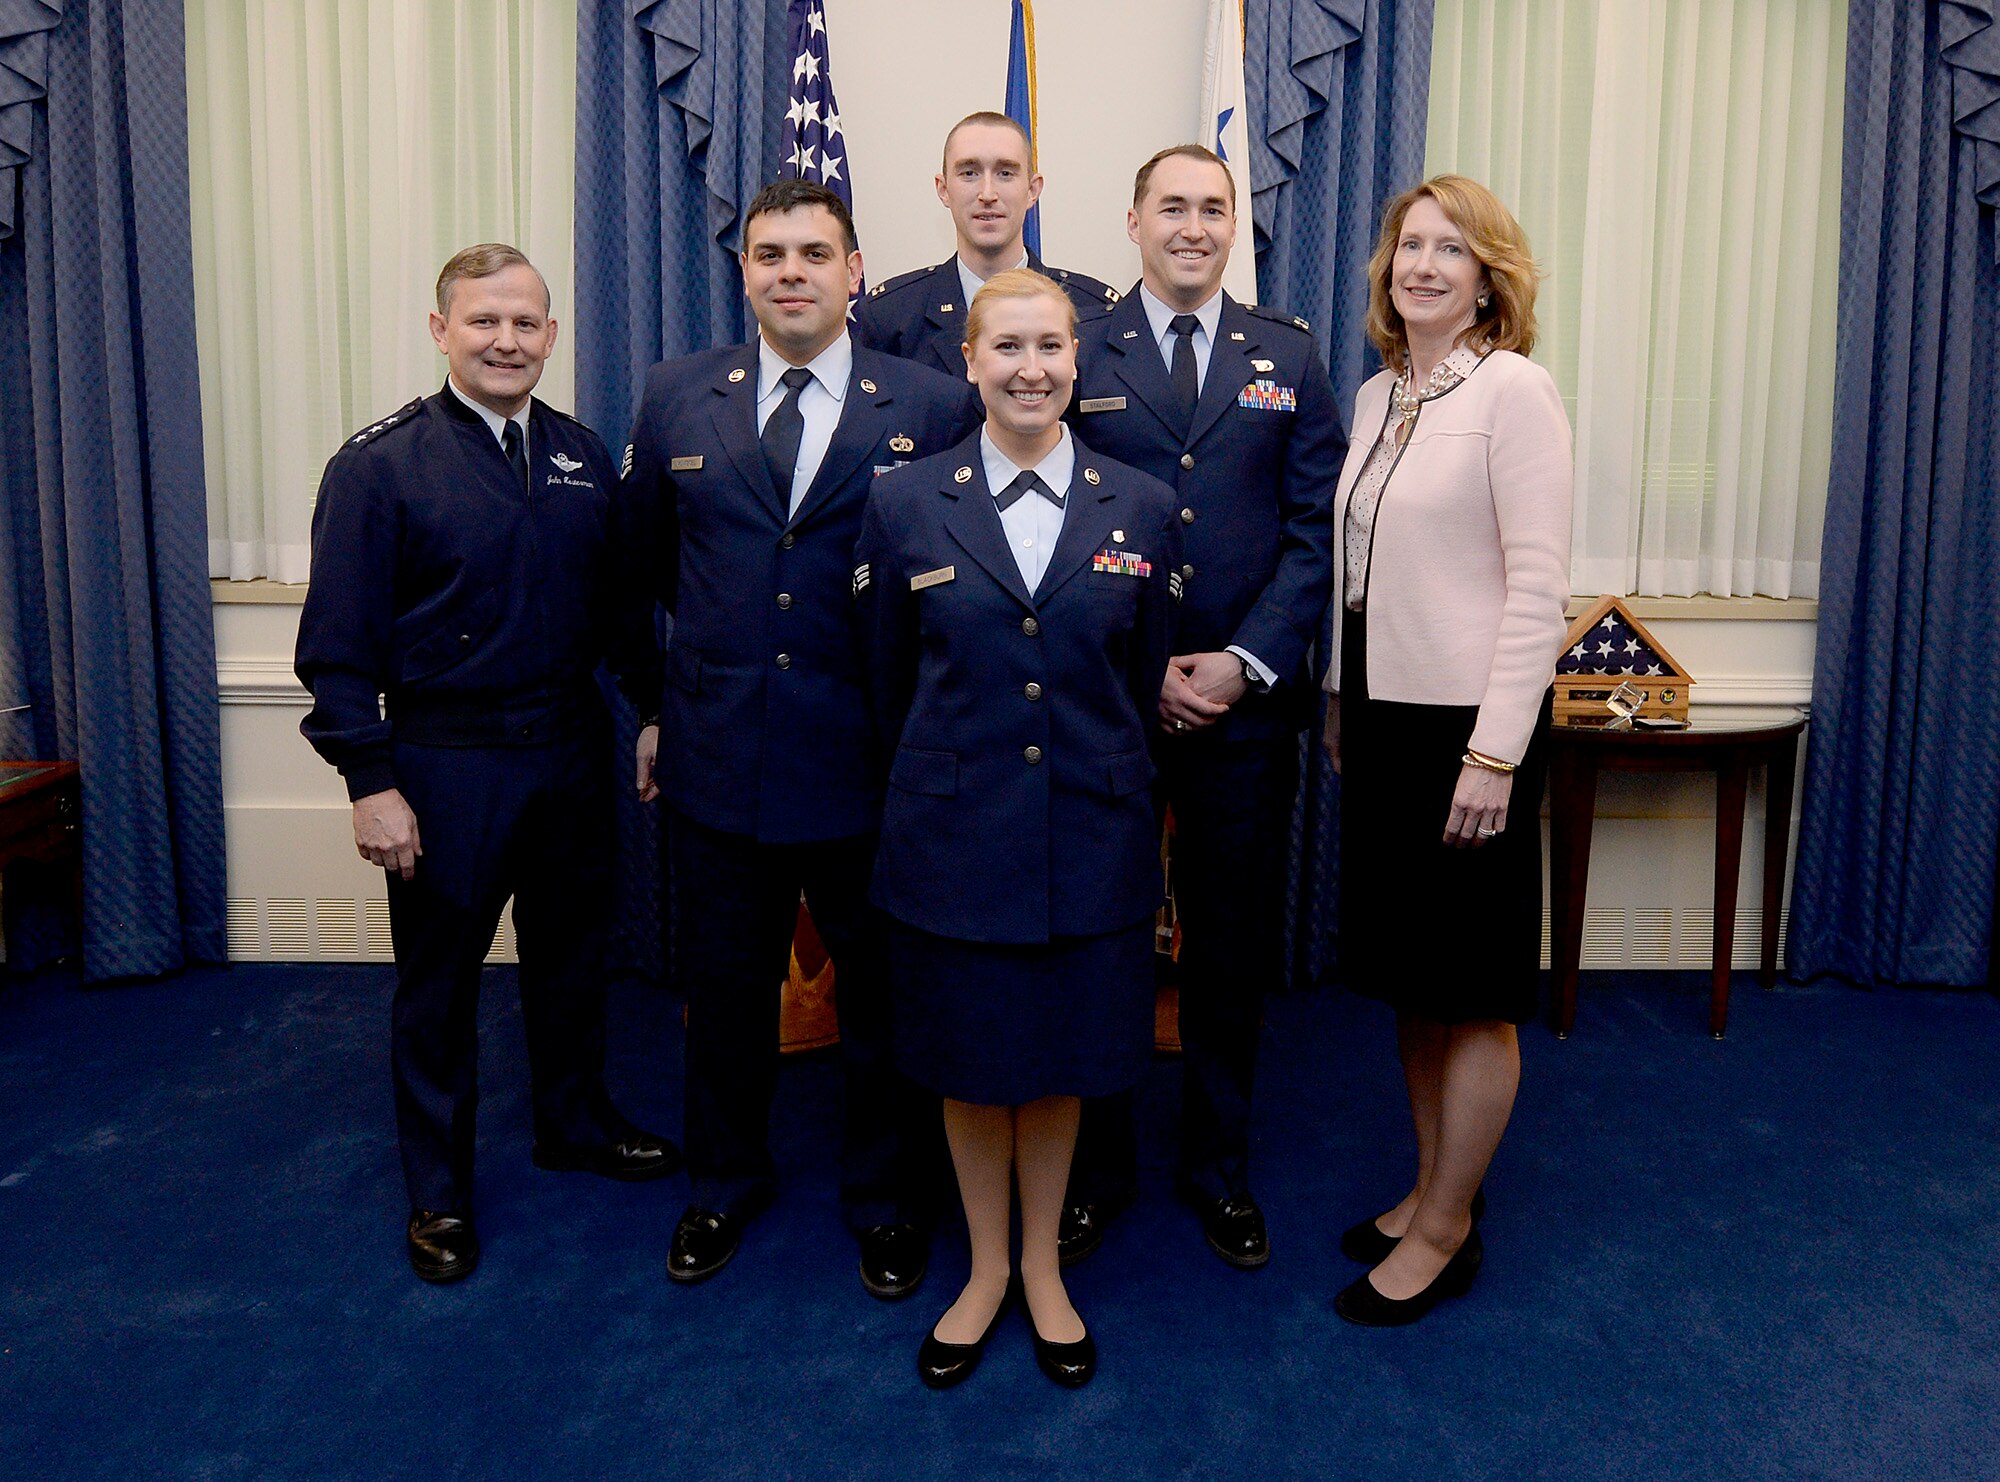 Lt. Gen. John Hesterman, the Air Force assistant vice chief of staff, and Under Secretary of the Air Force Lisa S. Disbrow congratulate Team 3-D Printing in the Pentagon, Feb. 29, 2016. (U.S. Air Force photo/Scott M. Ash)